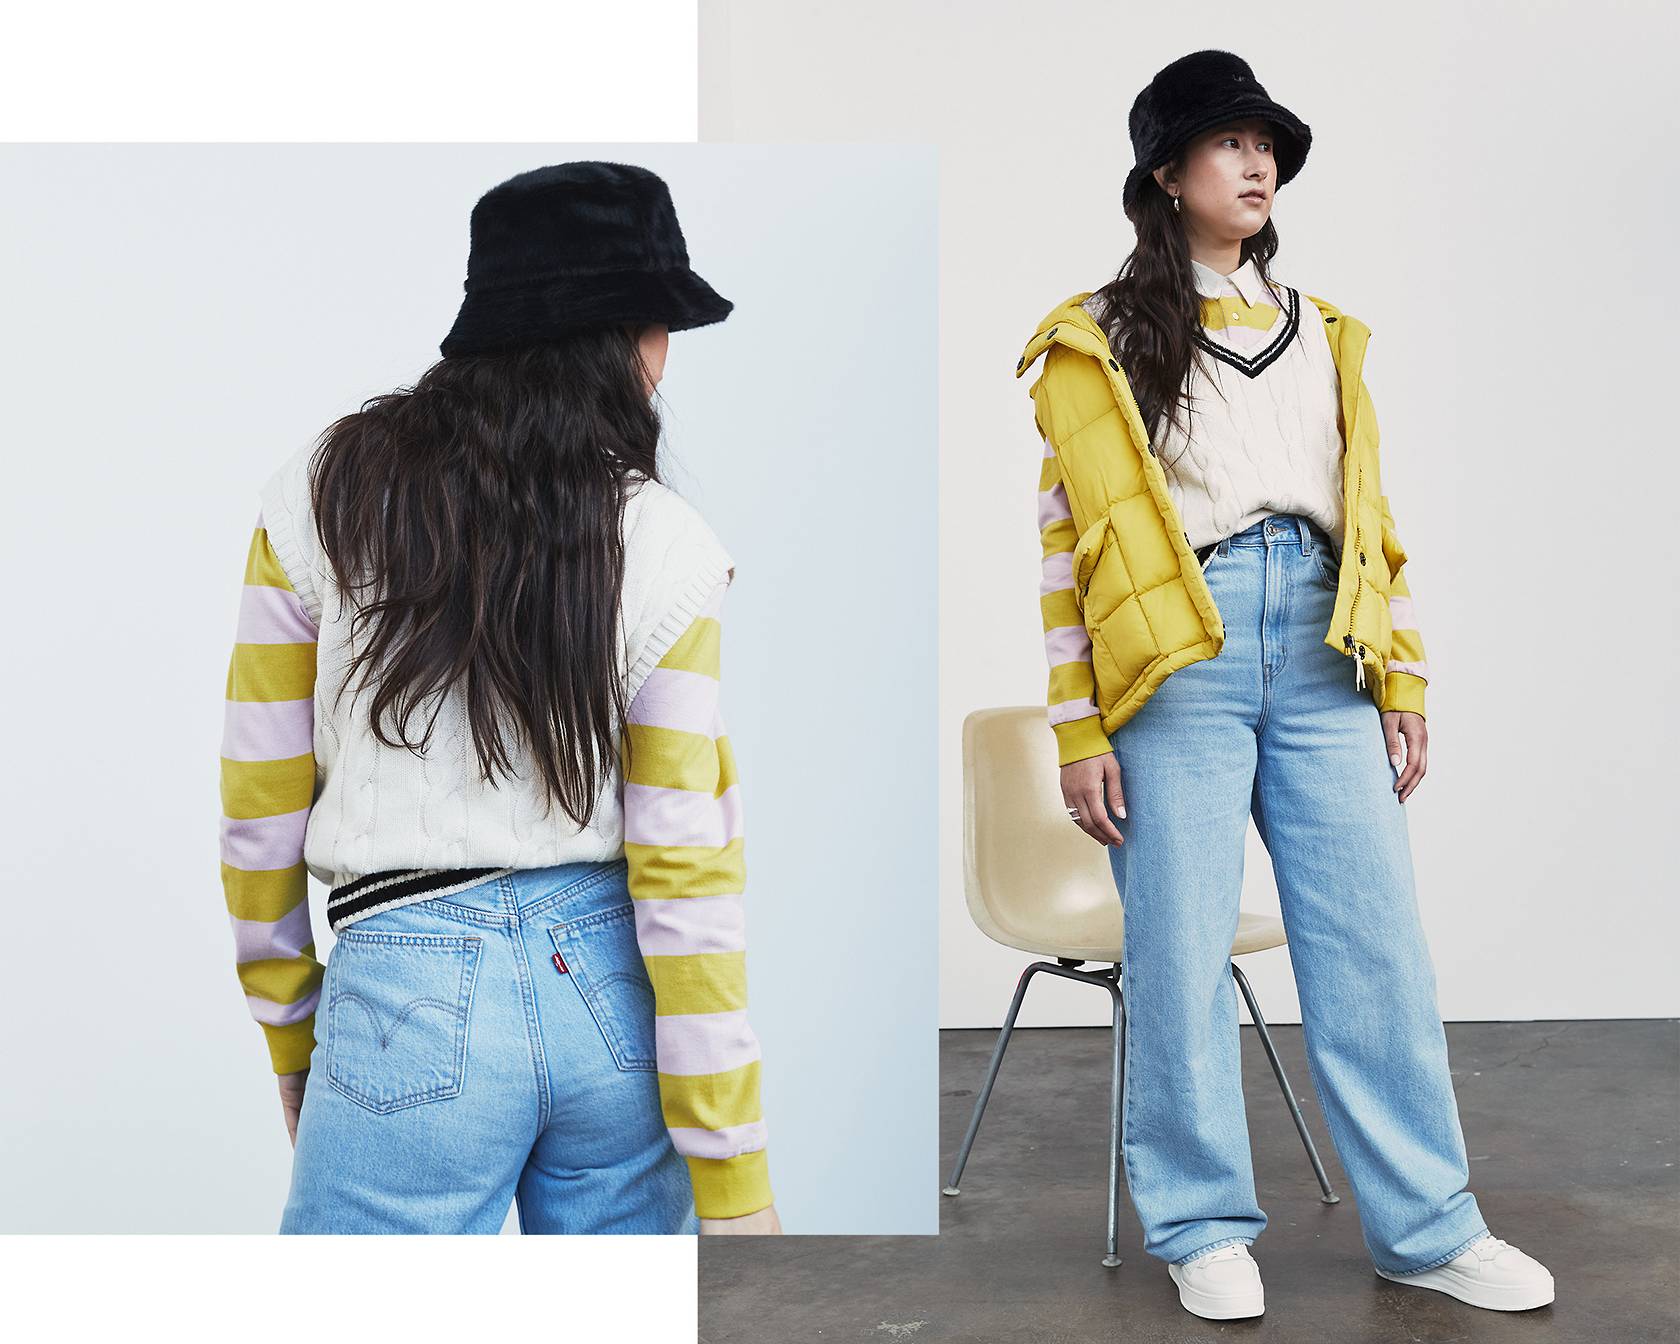 Image of the high loose jeans, black bucket hat, and a yellow puffy vest.